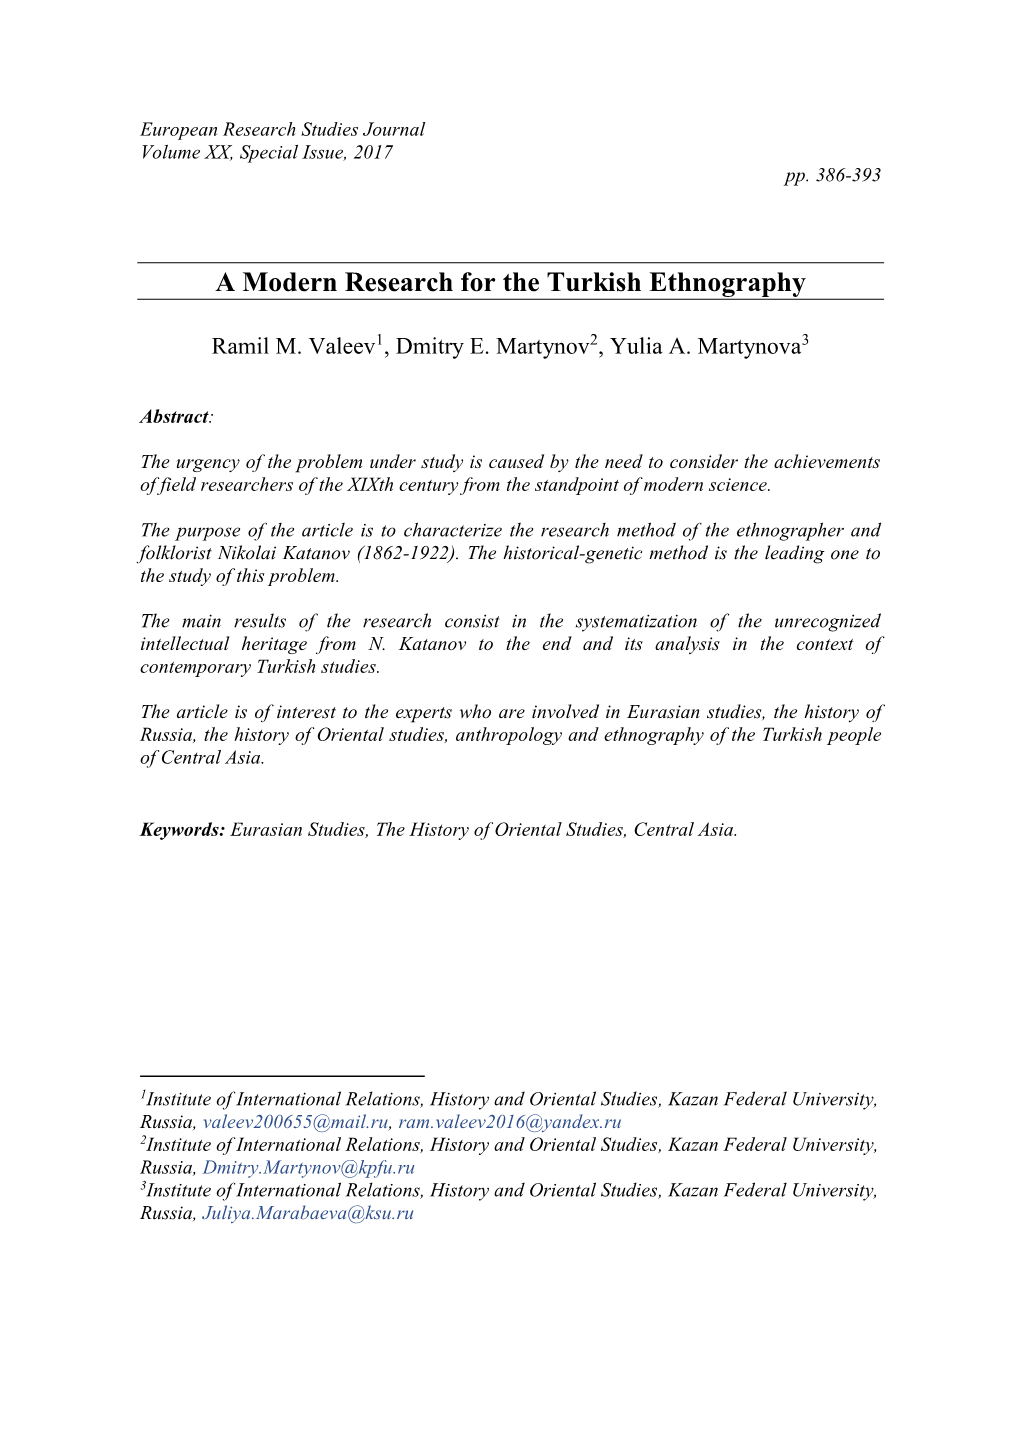 A Modern Research for the Turkish Ethnography